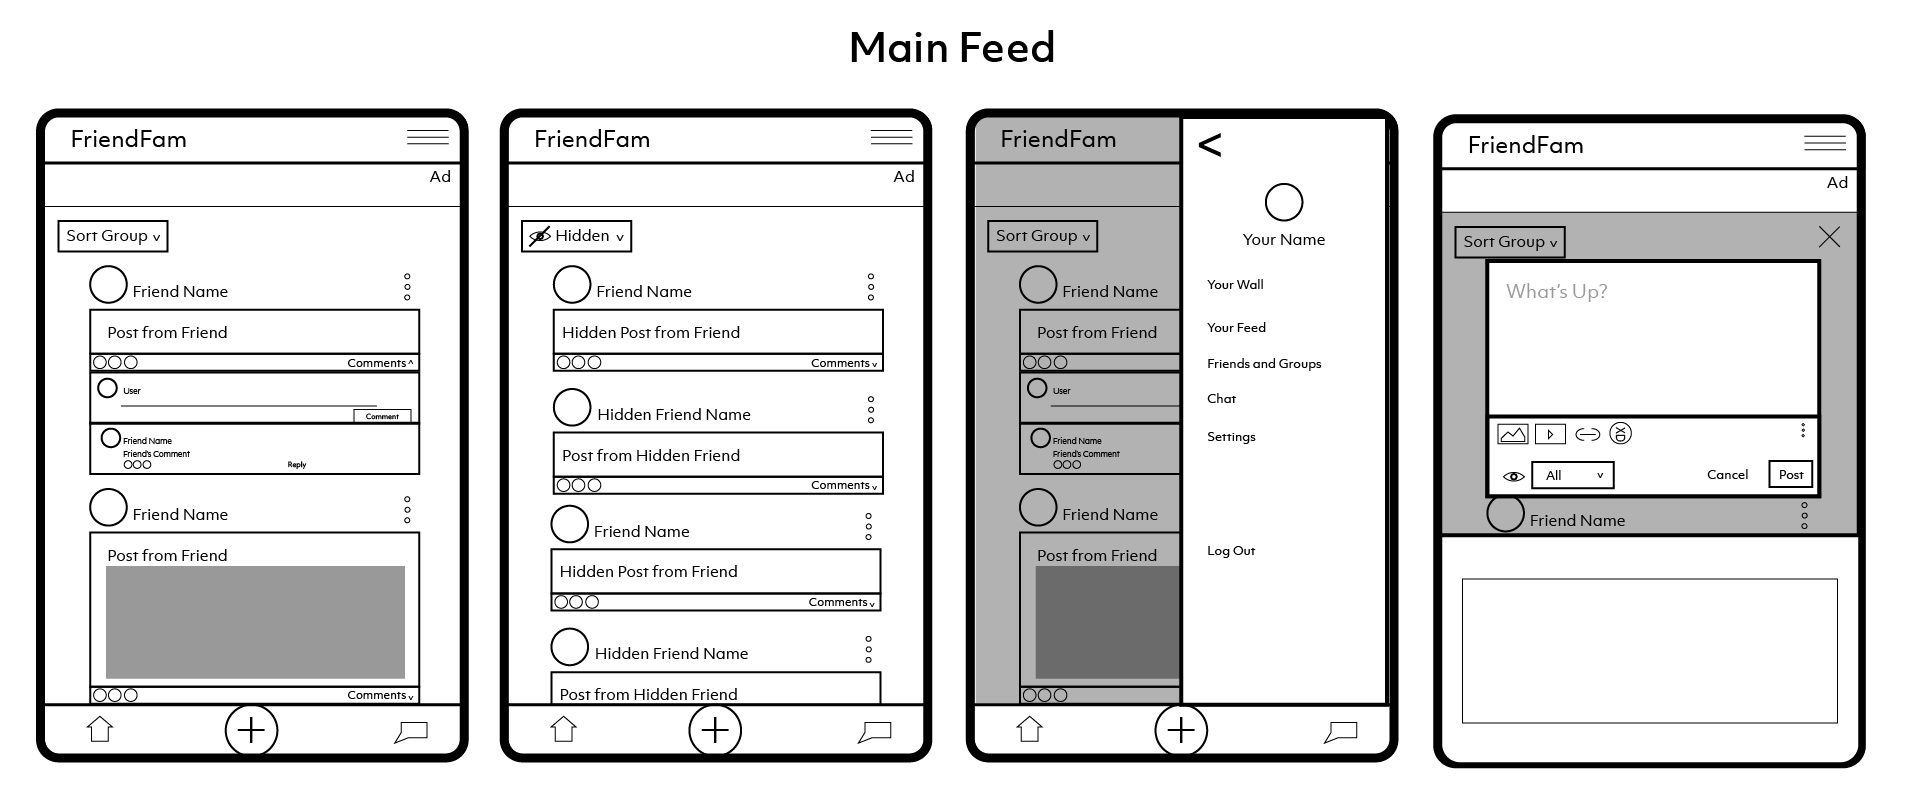 Wireframe drafts for main feed functions